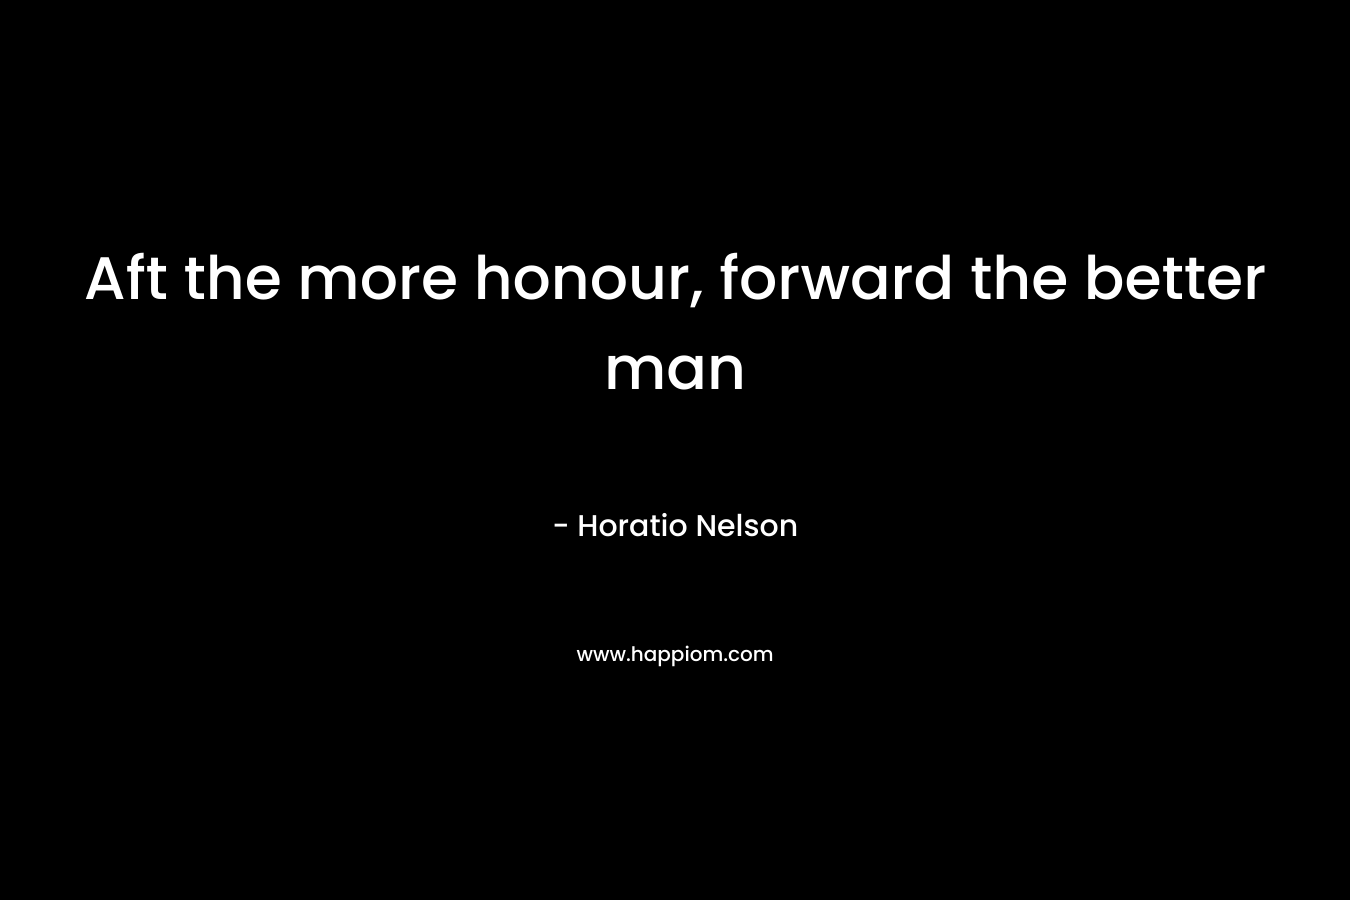 Aft the more honour, forward the better man – Horatio Nelson